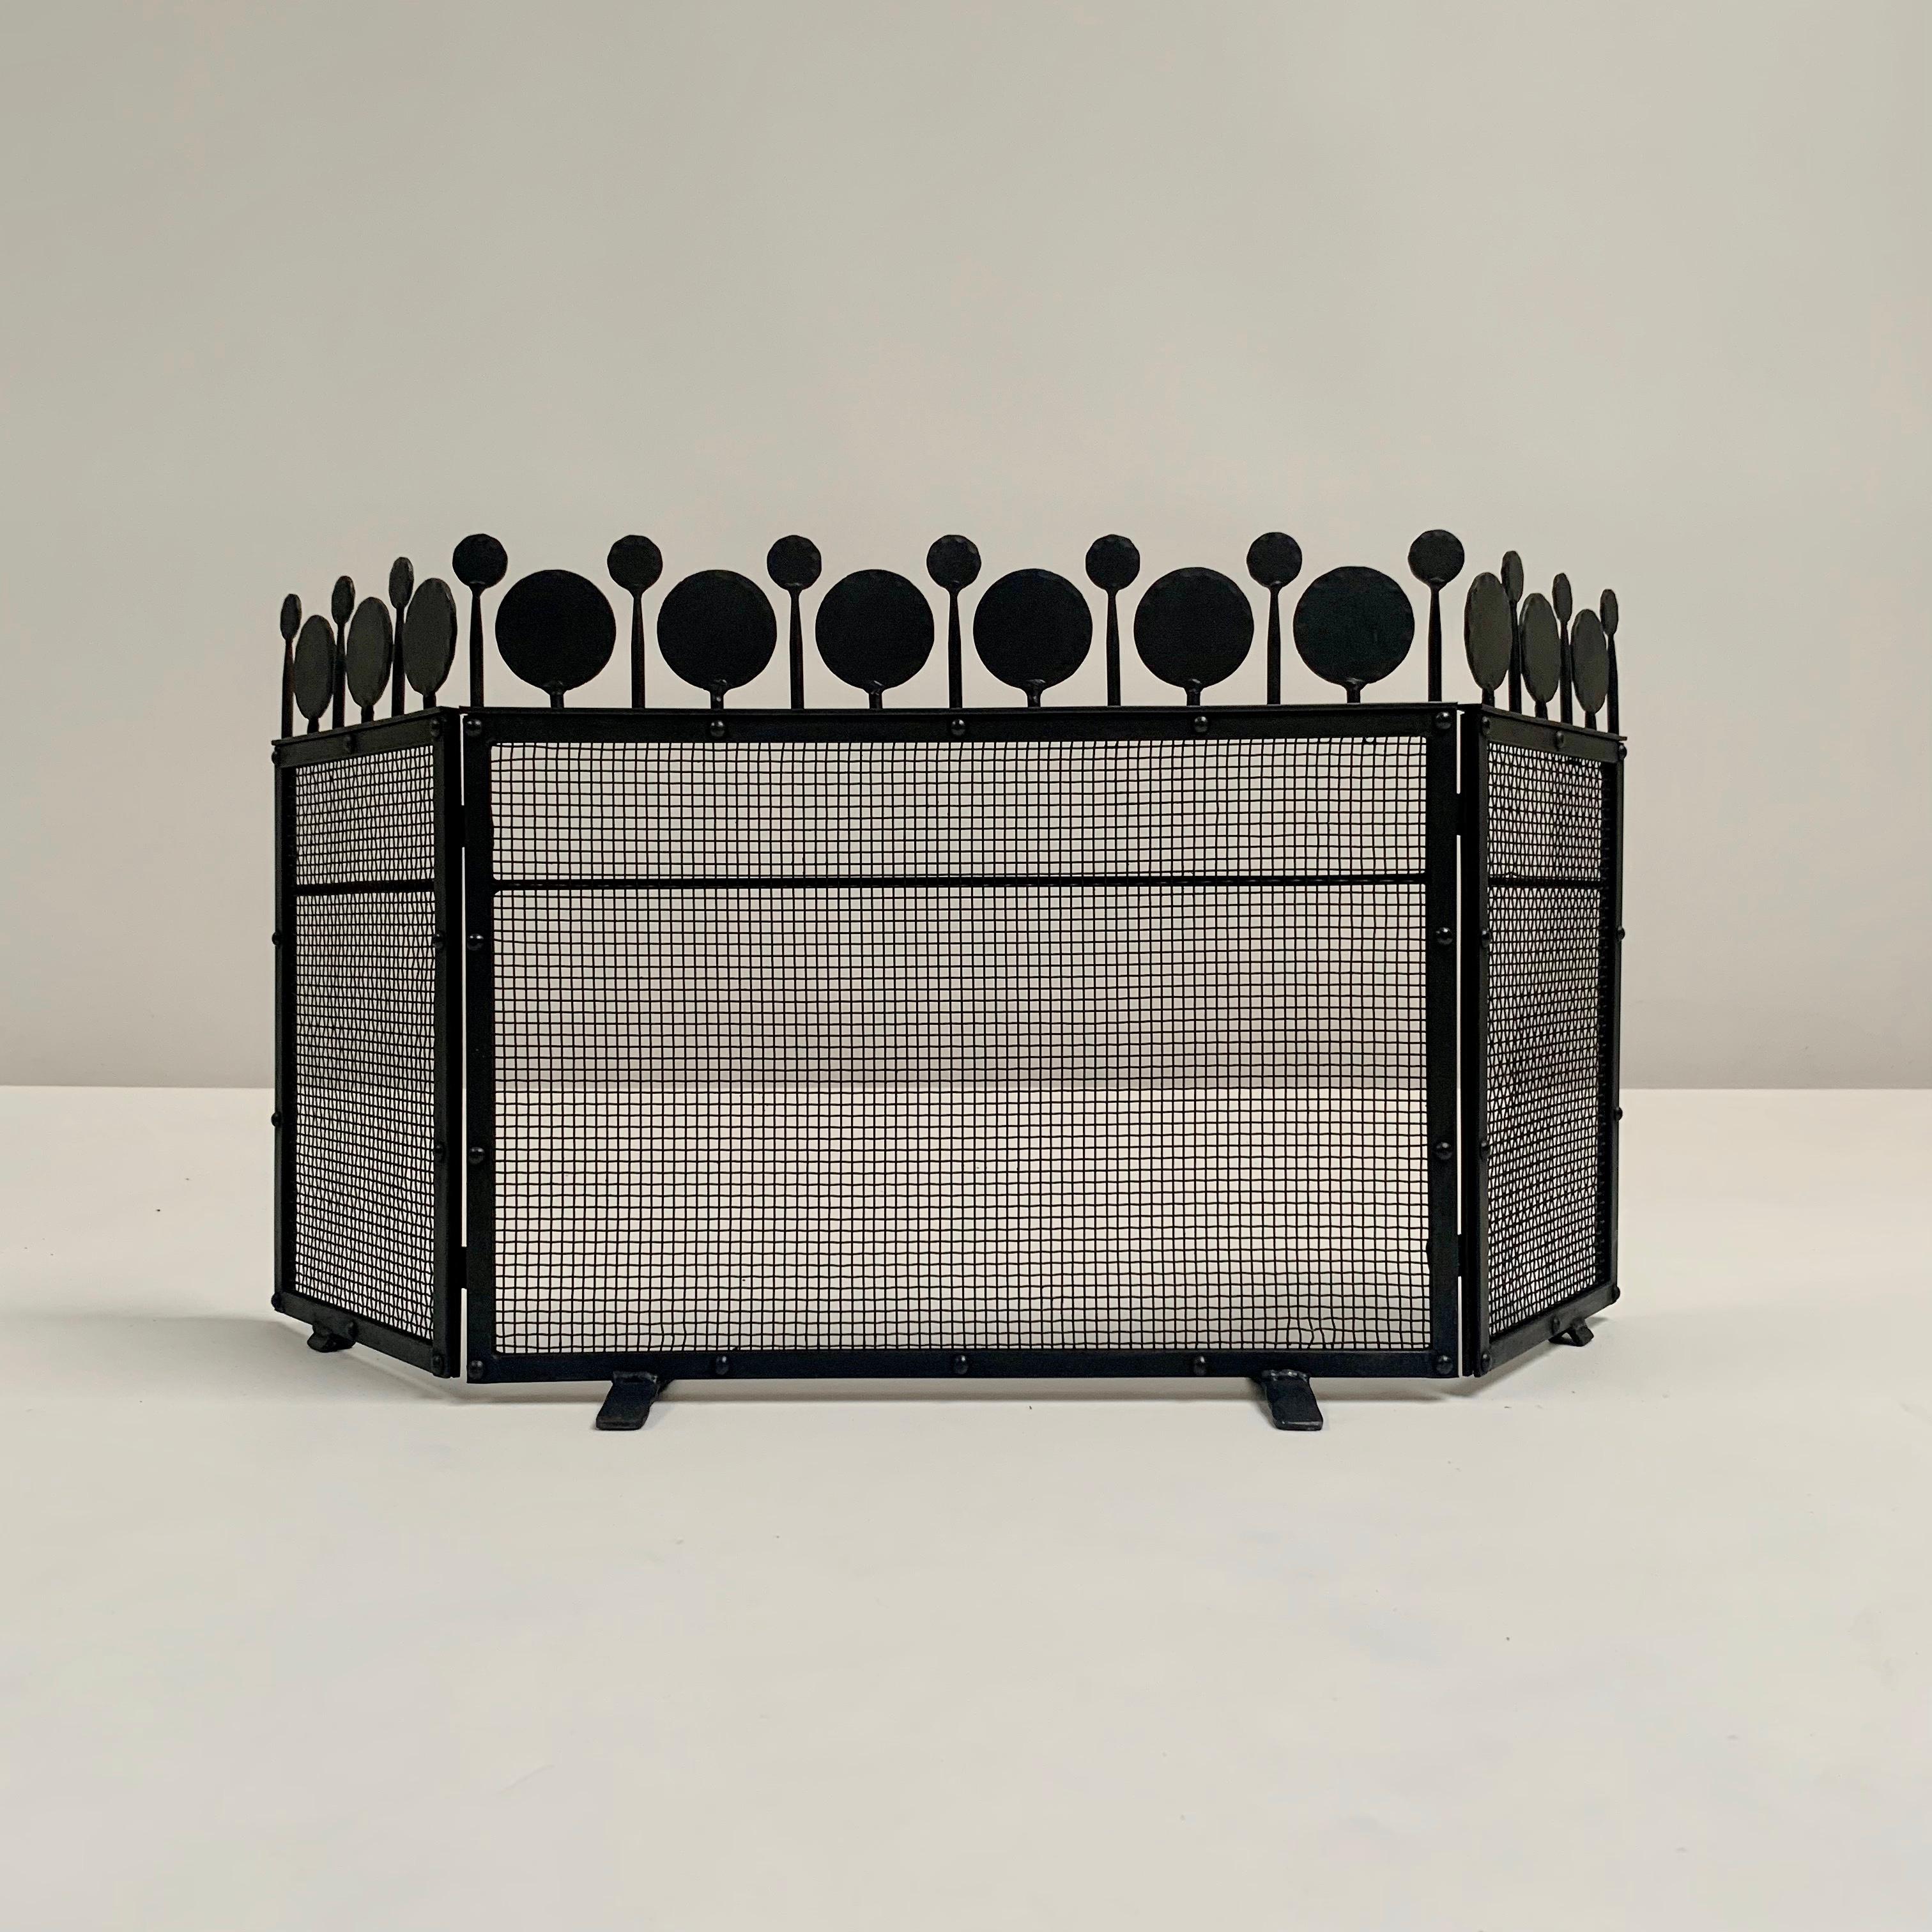 Beautiful and rare Bertil Vallien wrought iron fire screen.
Boda edition, circa 1960, Sweden.
Rare piece on the market, very poetic and decorative object.
Good original condition.
Height : 39 cm, maximum length : 86 cm
All purchases are covered by